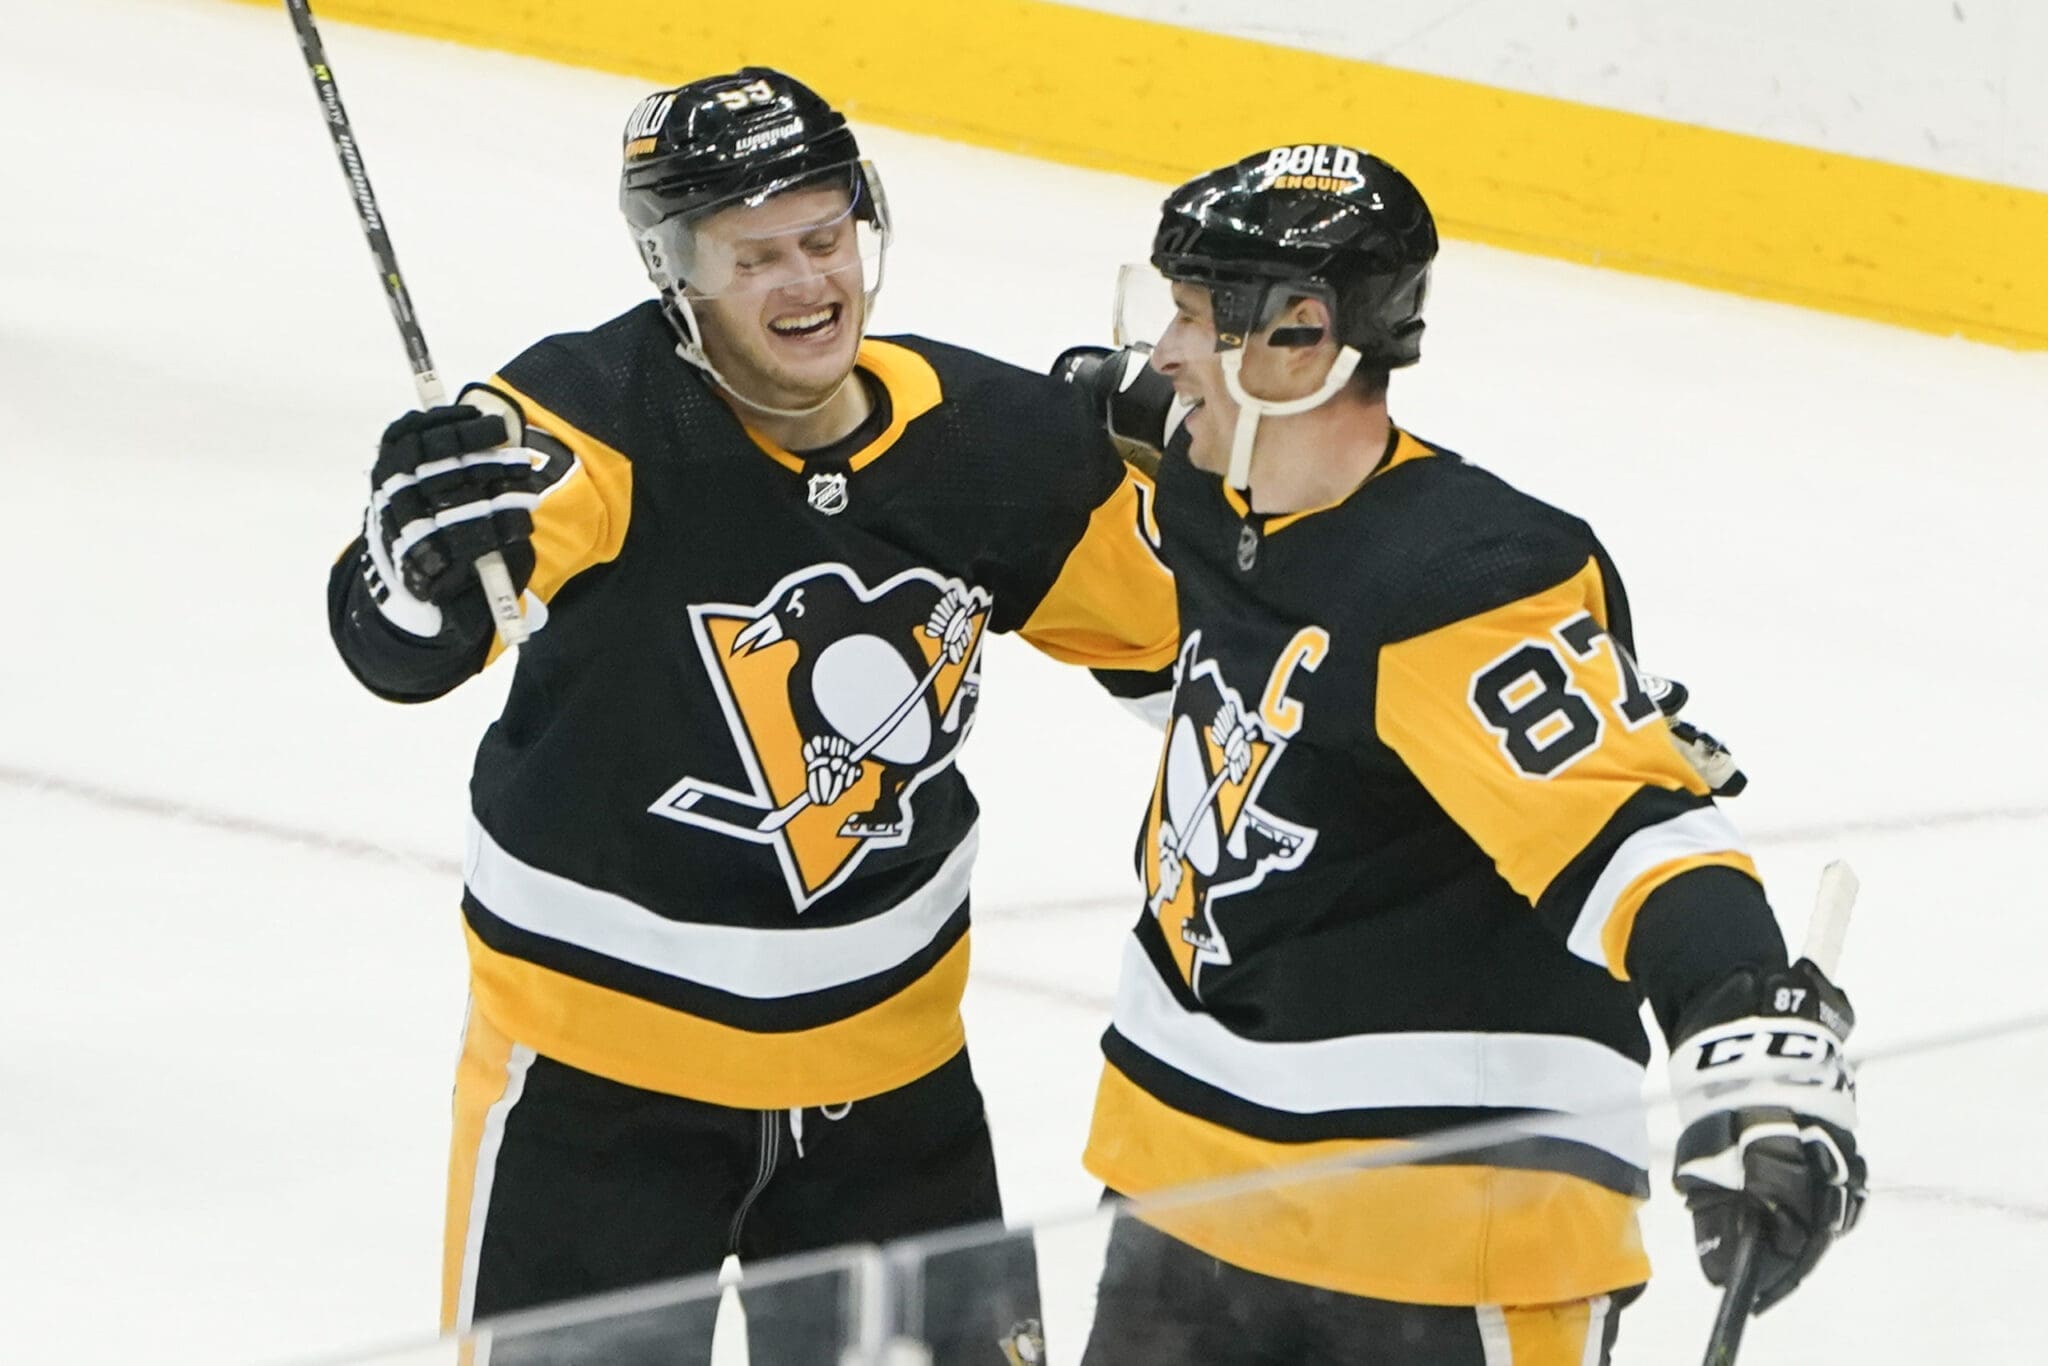 Report Penguins Ratings Best in NHL, but DOWN 30%